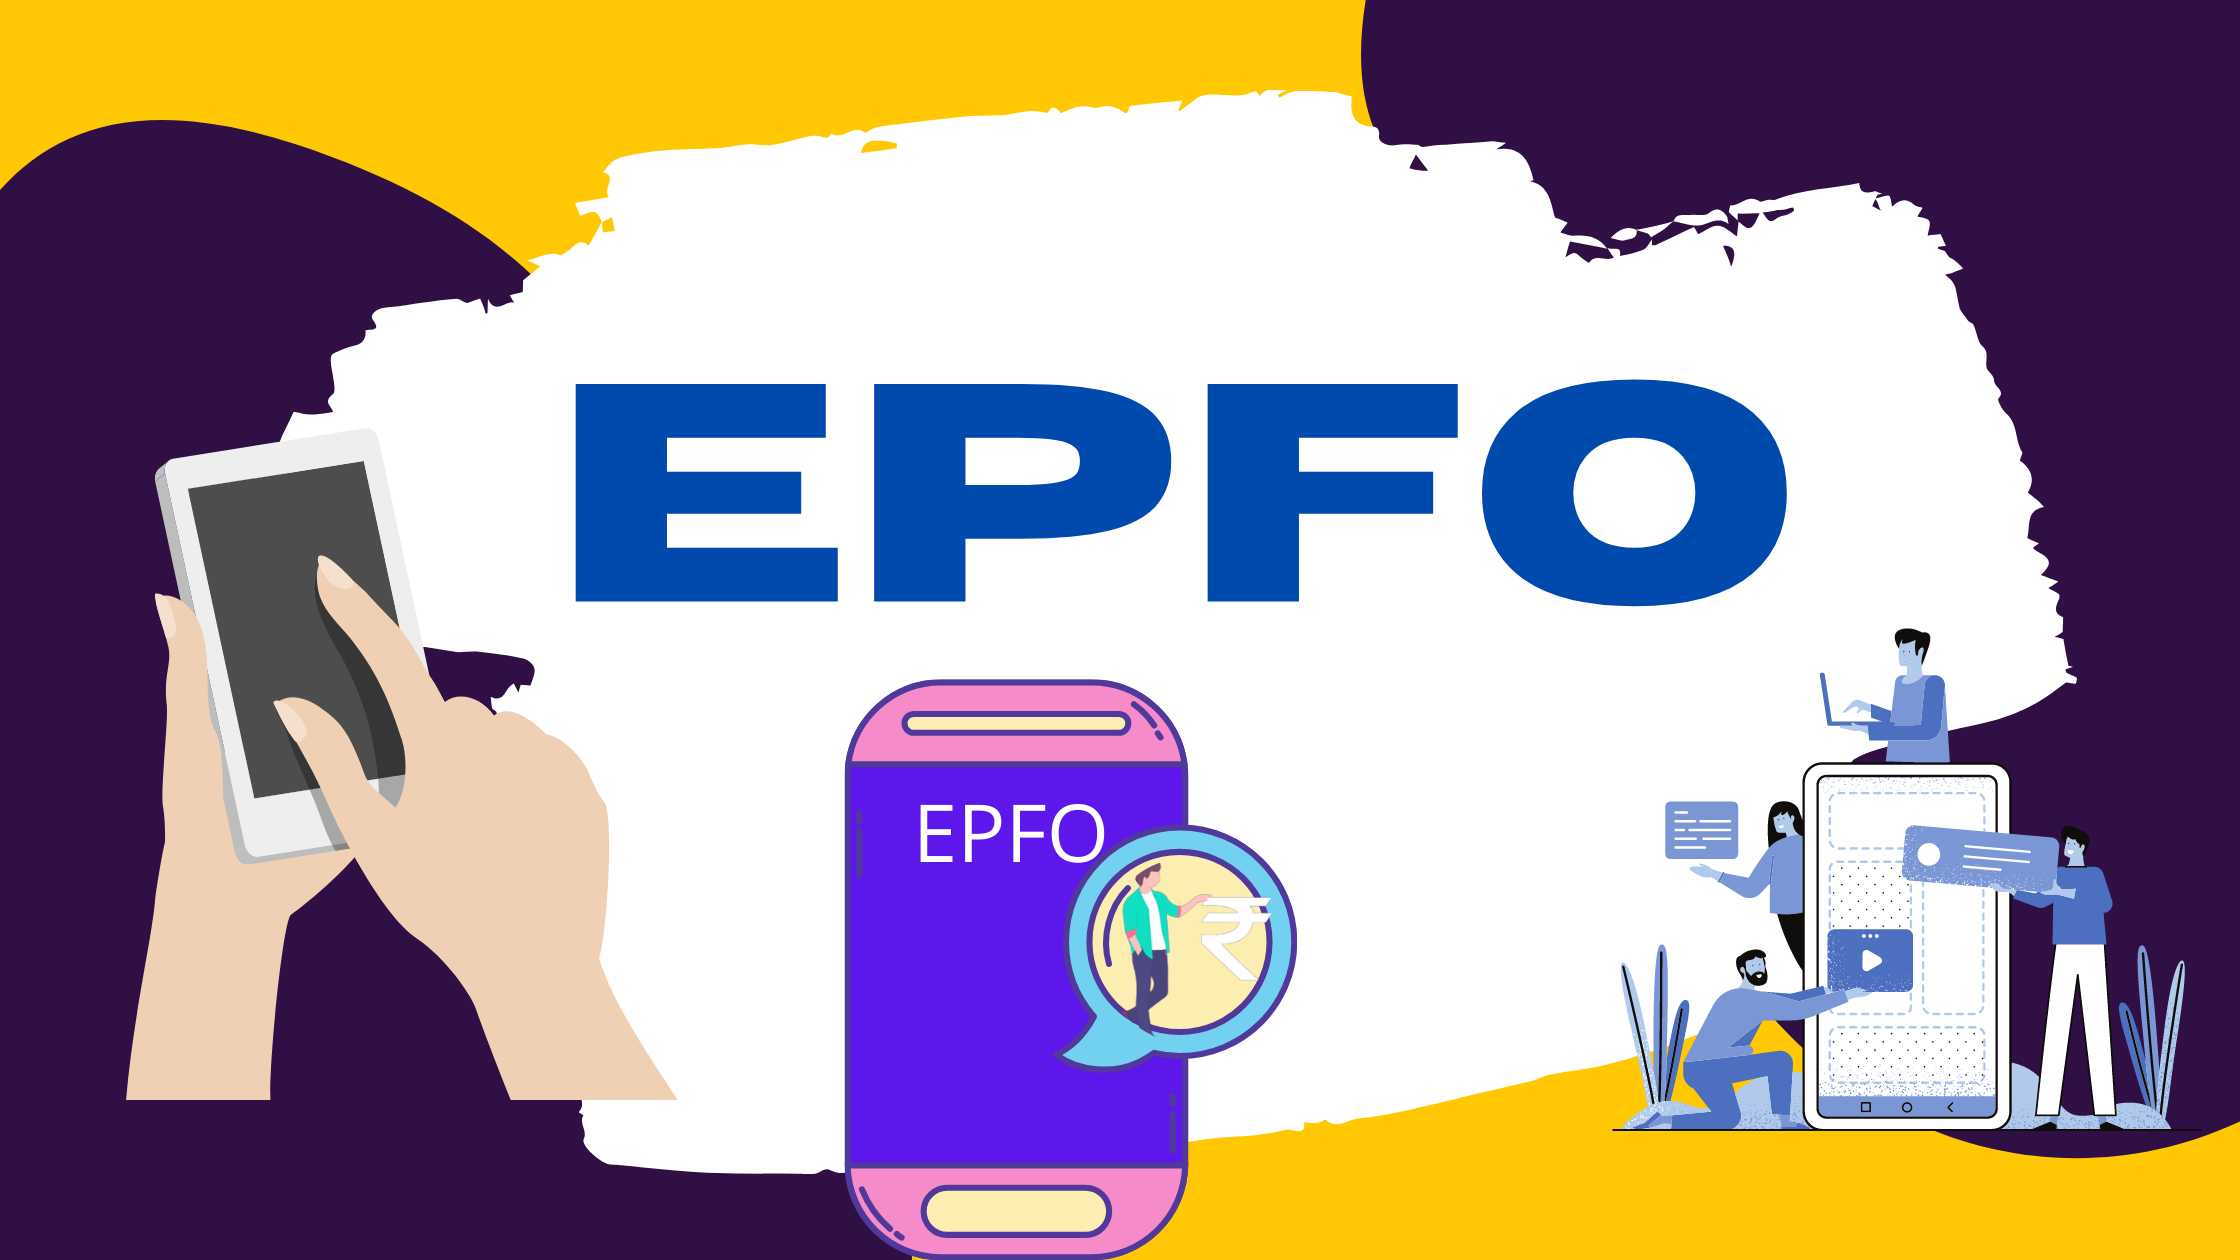 EPFO adds 14.81 lakh net subscribers in August